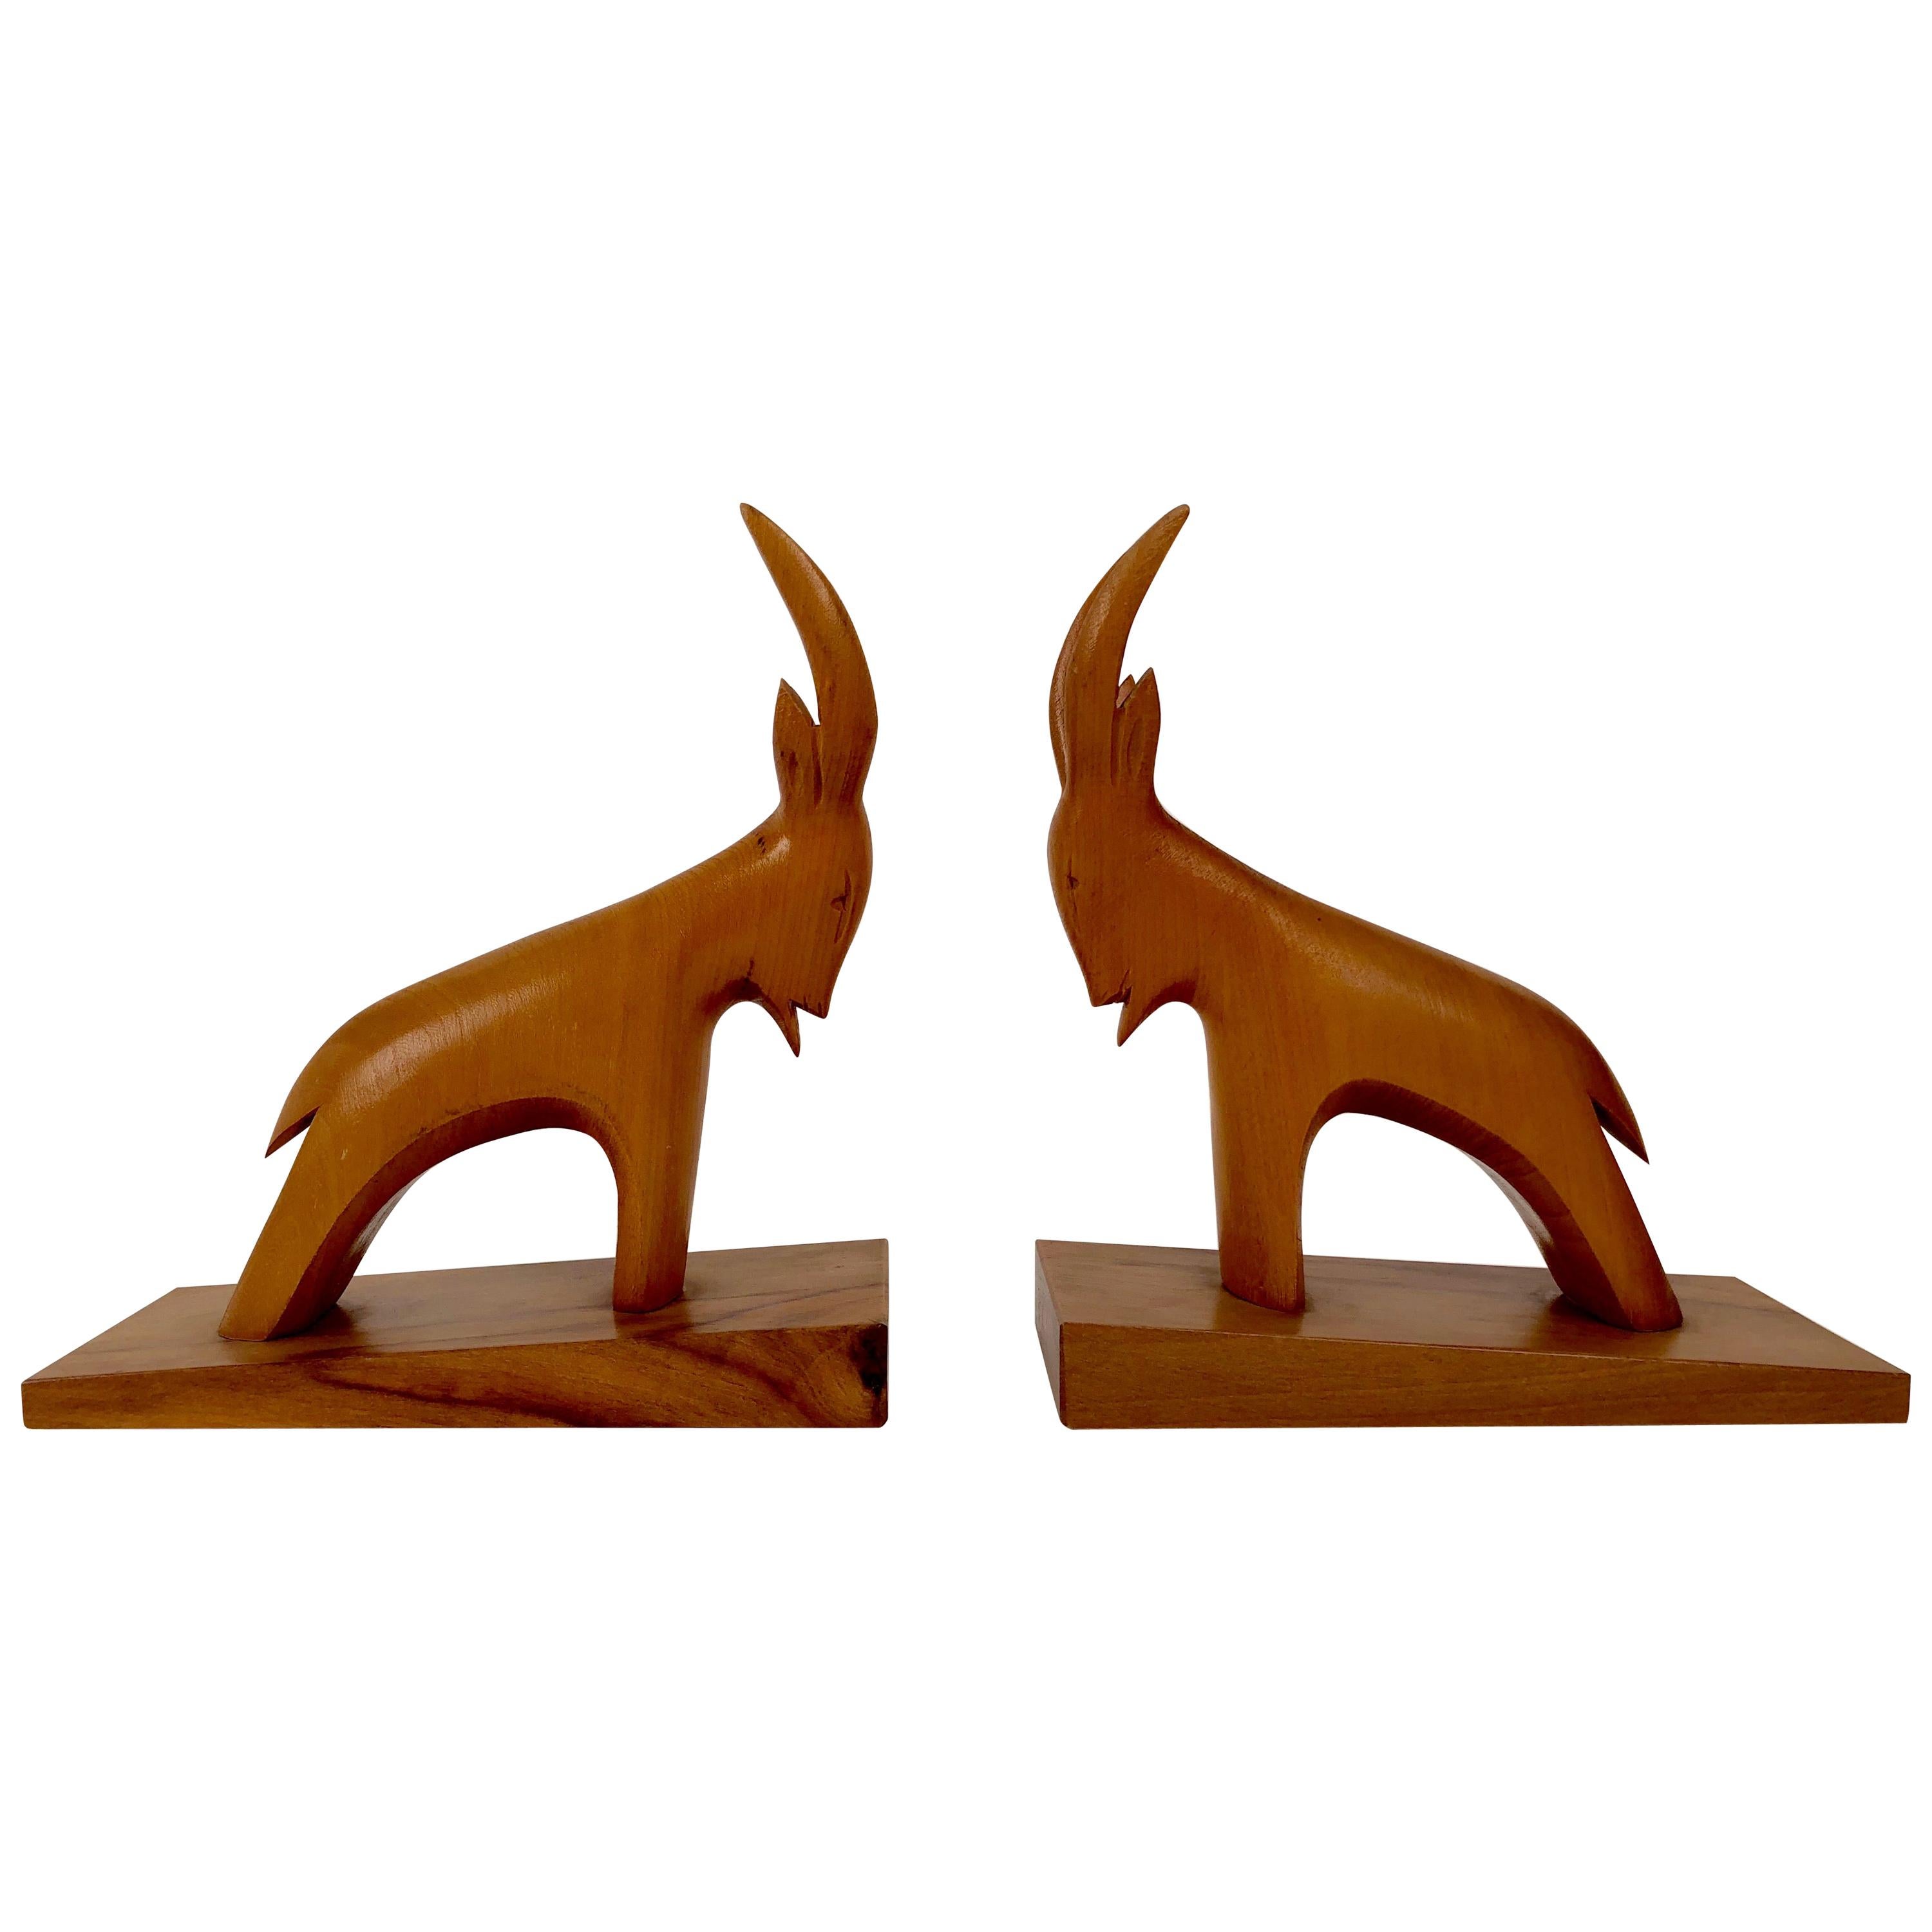 Pair of Midcentury, Abstract, Stein Böcks, in Cherry Wood from Austria